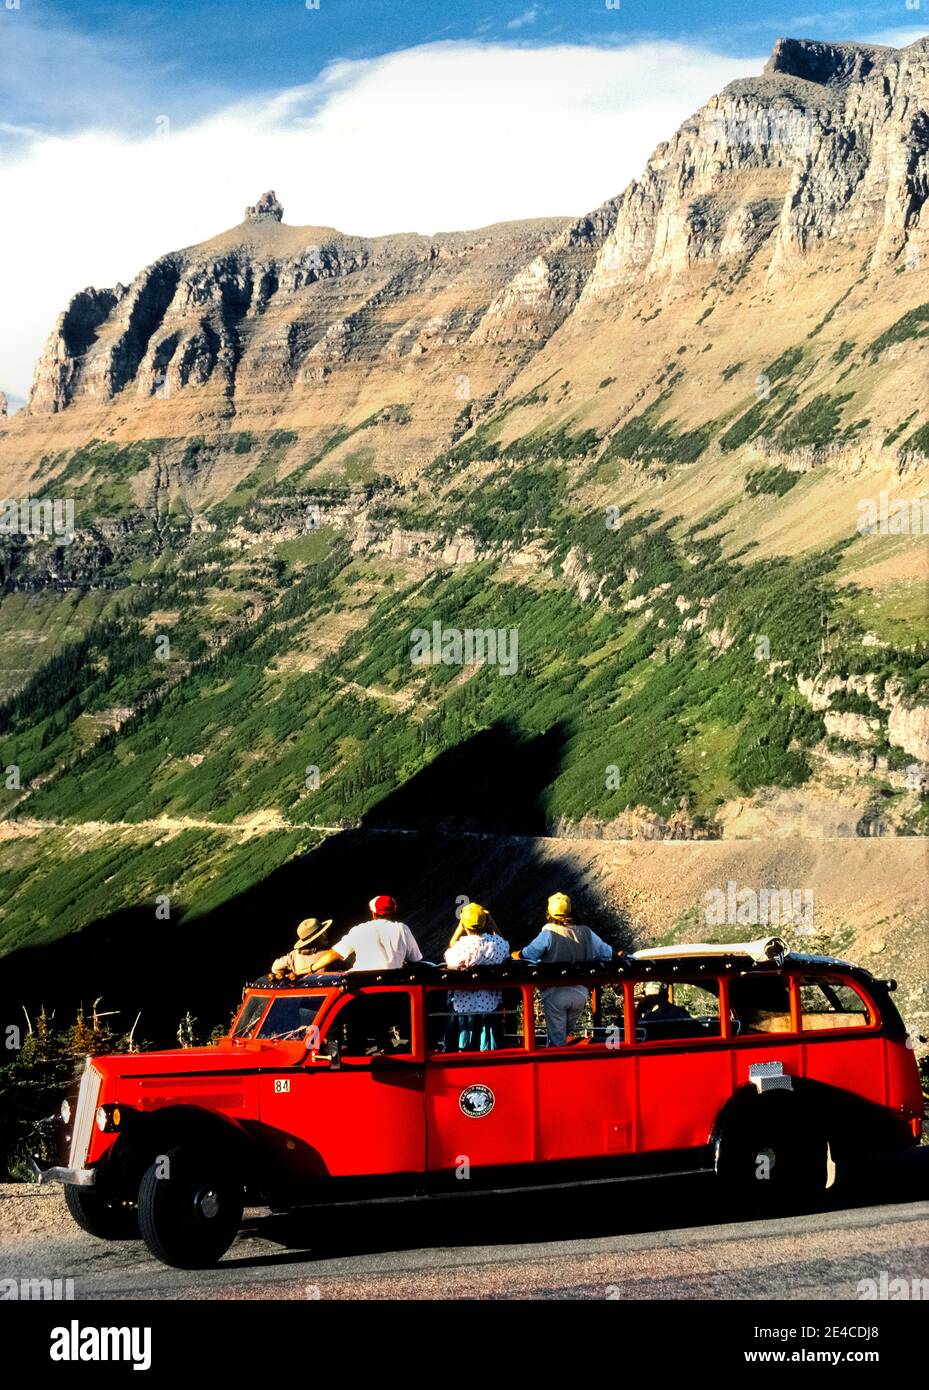 This long 1930s red touring bus features a roll-back canvas rooftop that opens to provide panoramic views of awesome mountain peaks for tourists on scenic excursions along the Going-to-the-Sun Road in Glacier National Park in northwest Montana, USA. The 17-passenger vehicle is among the park’s fleet of 33 identical buses that are known as Red Jammers because their drivers noisily 'jammed' the gears when double-shifting the manual transmissions on the steep mountainous roads. All of those historic White Motor Company No. 706 models have been restored to their original appearance. Stock Photo